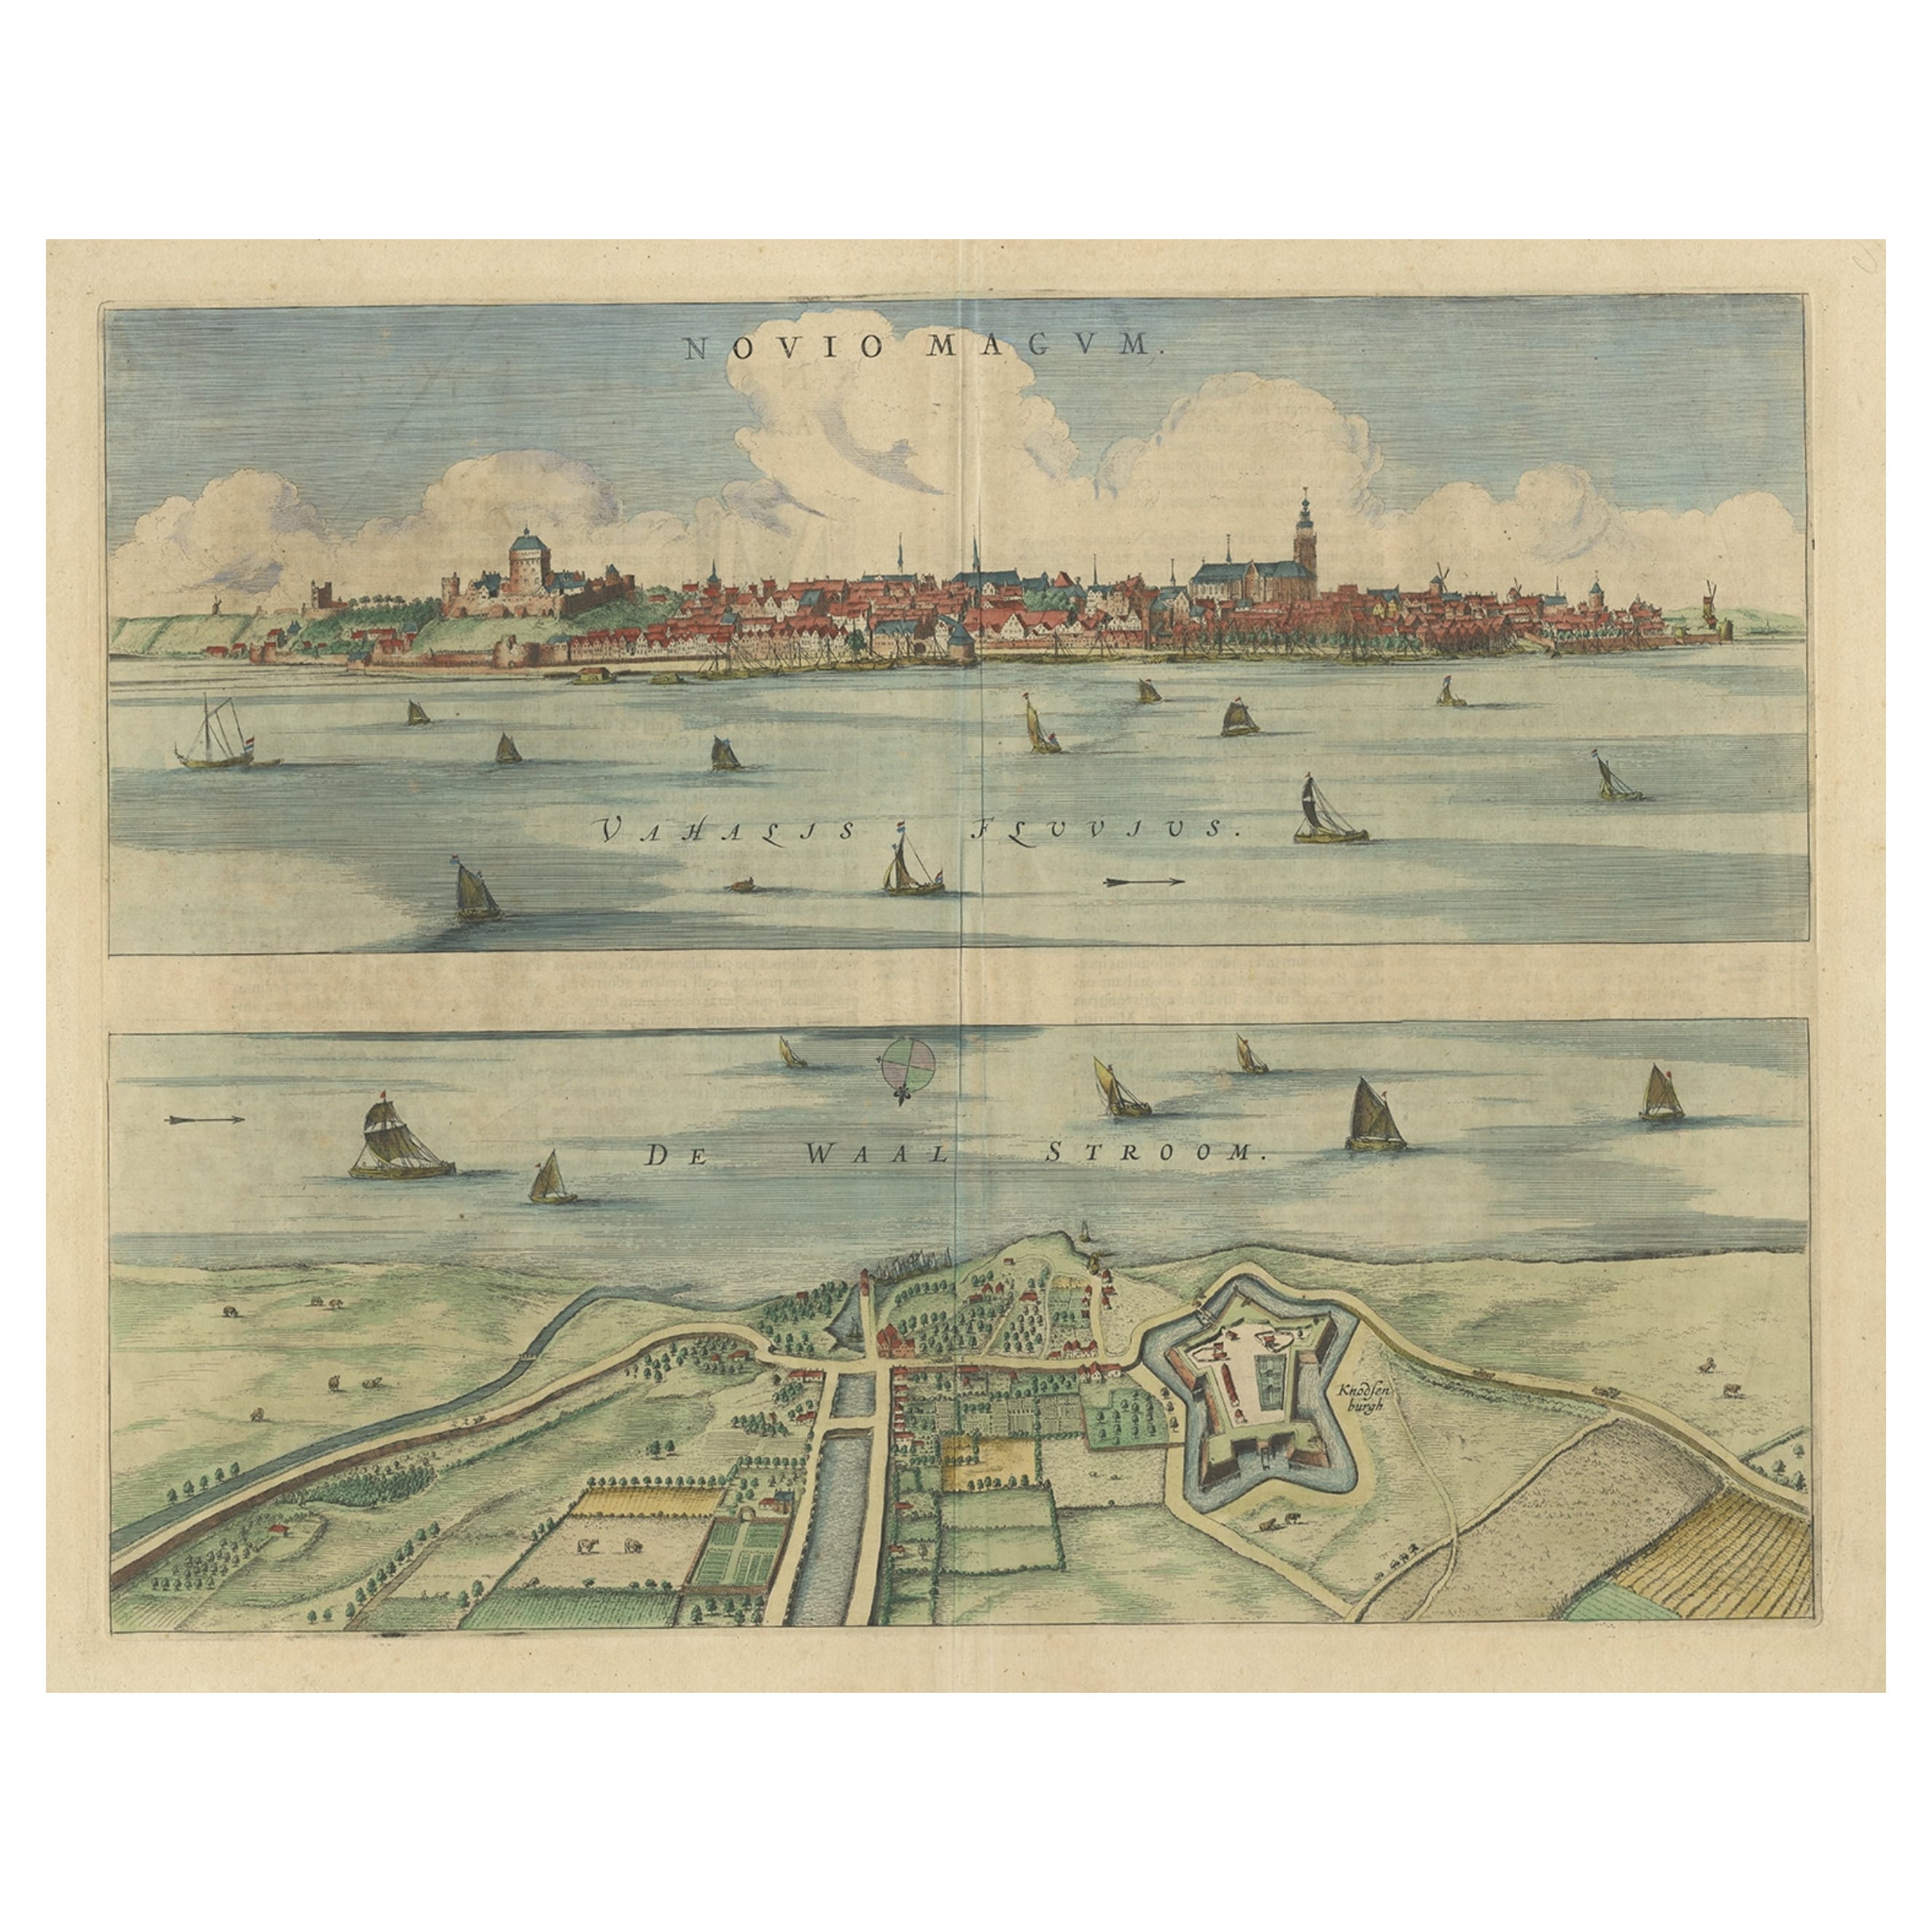 Beautiful Birds-Eye View of Nijmegen and the Waal River, the Netherlands, 1649